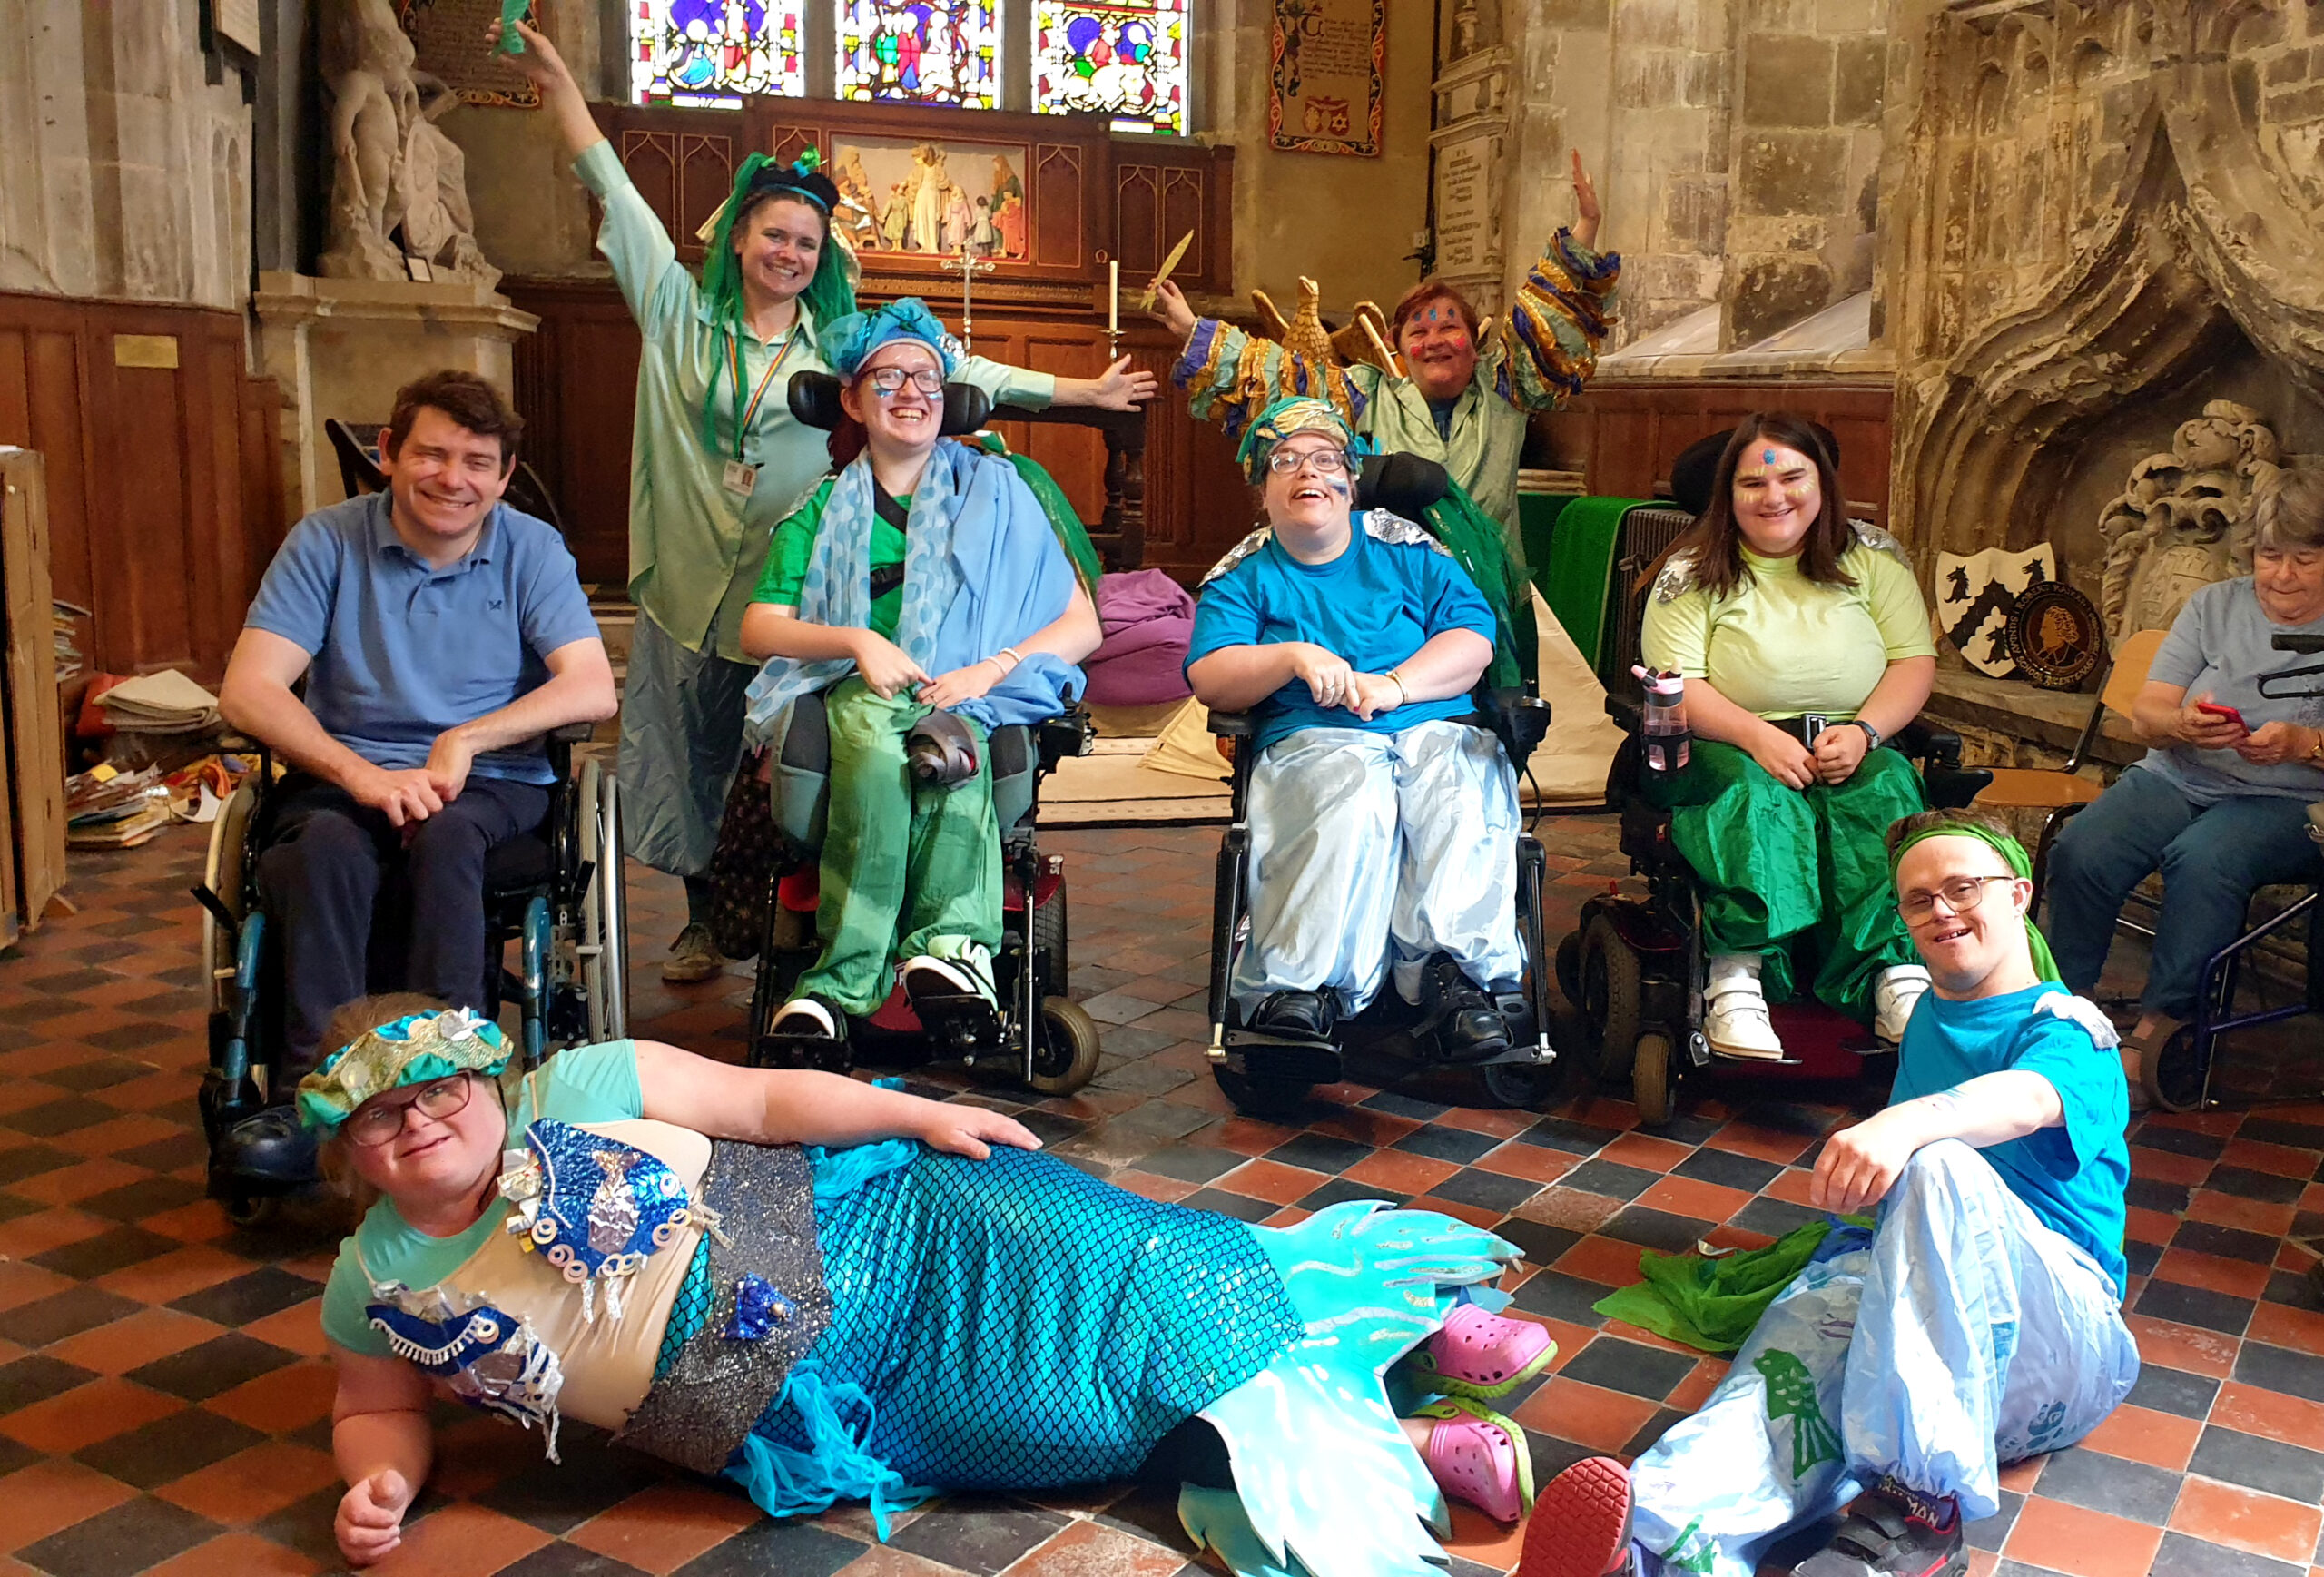 A photograph of members of the VIA Dance Company inside Gloucester cathedral. Participants are dressed in colourful blue outfits that represent water. There are 4 wheelchair users in the middle row. The particiants are in costume ready for Hi!Street fest, a summer festival in Gloucester city in 2023